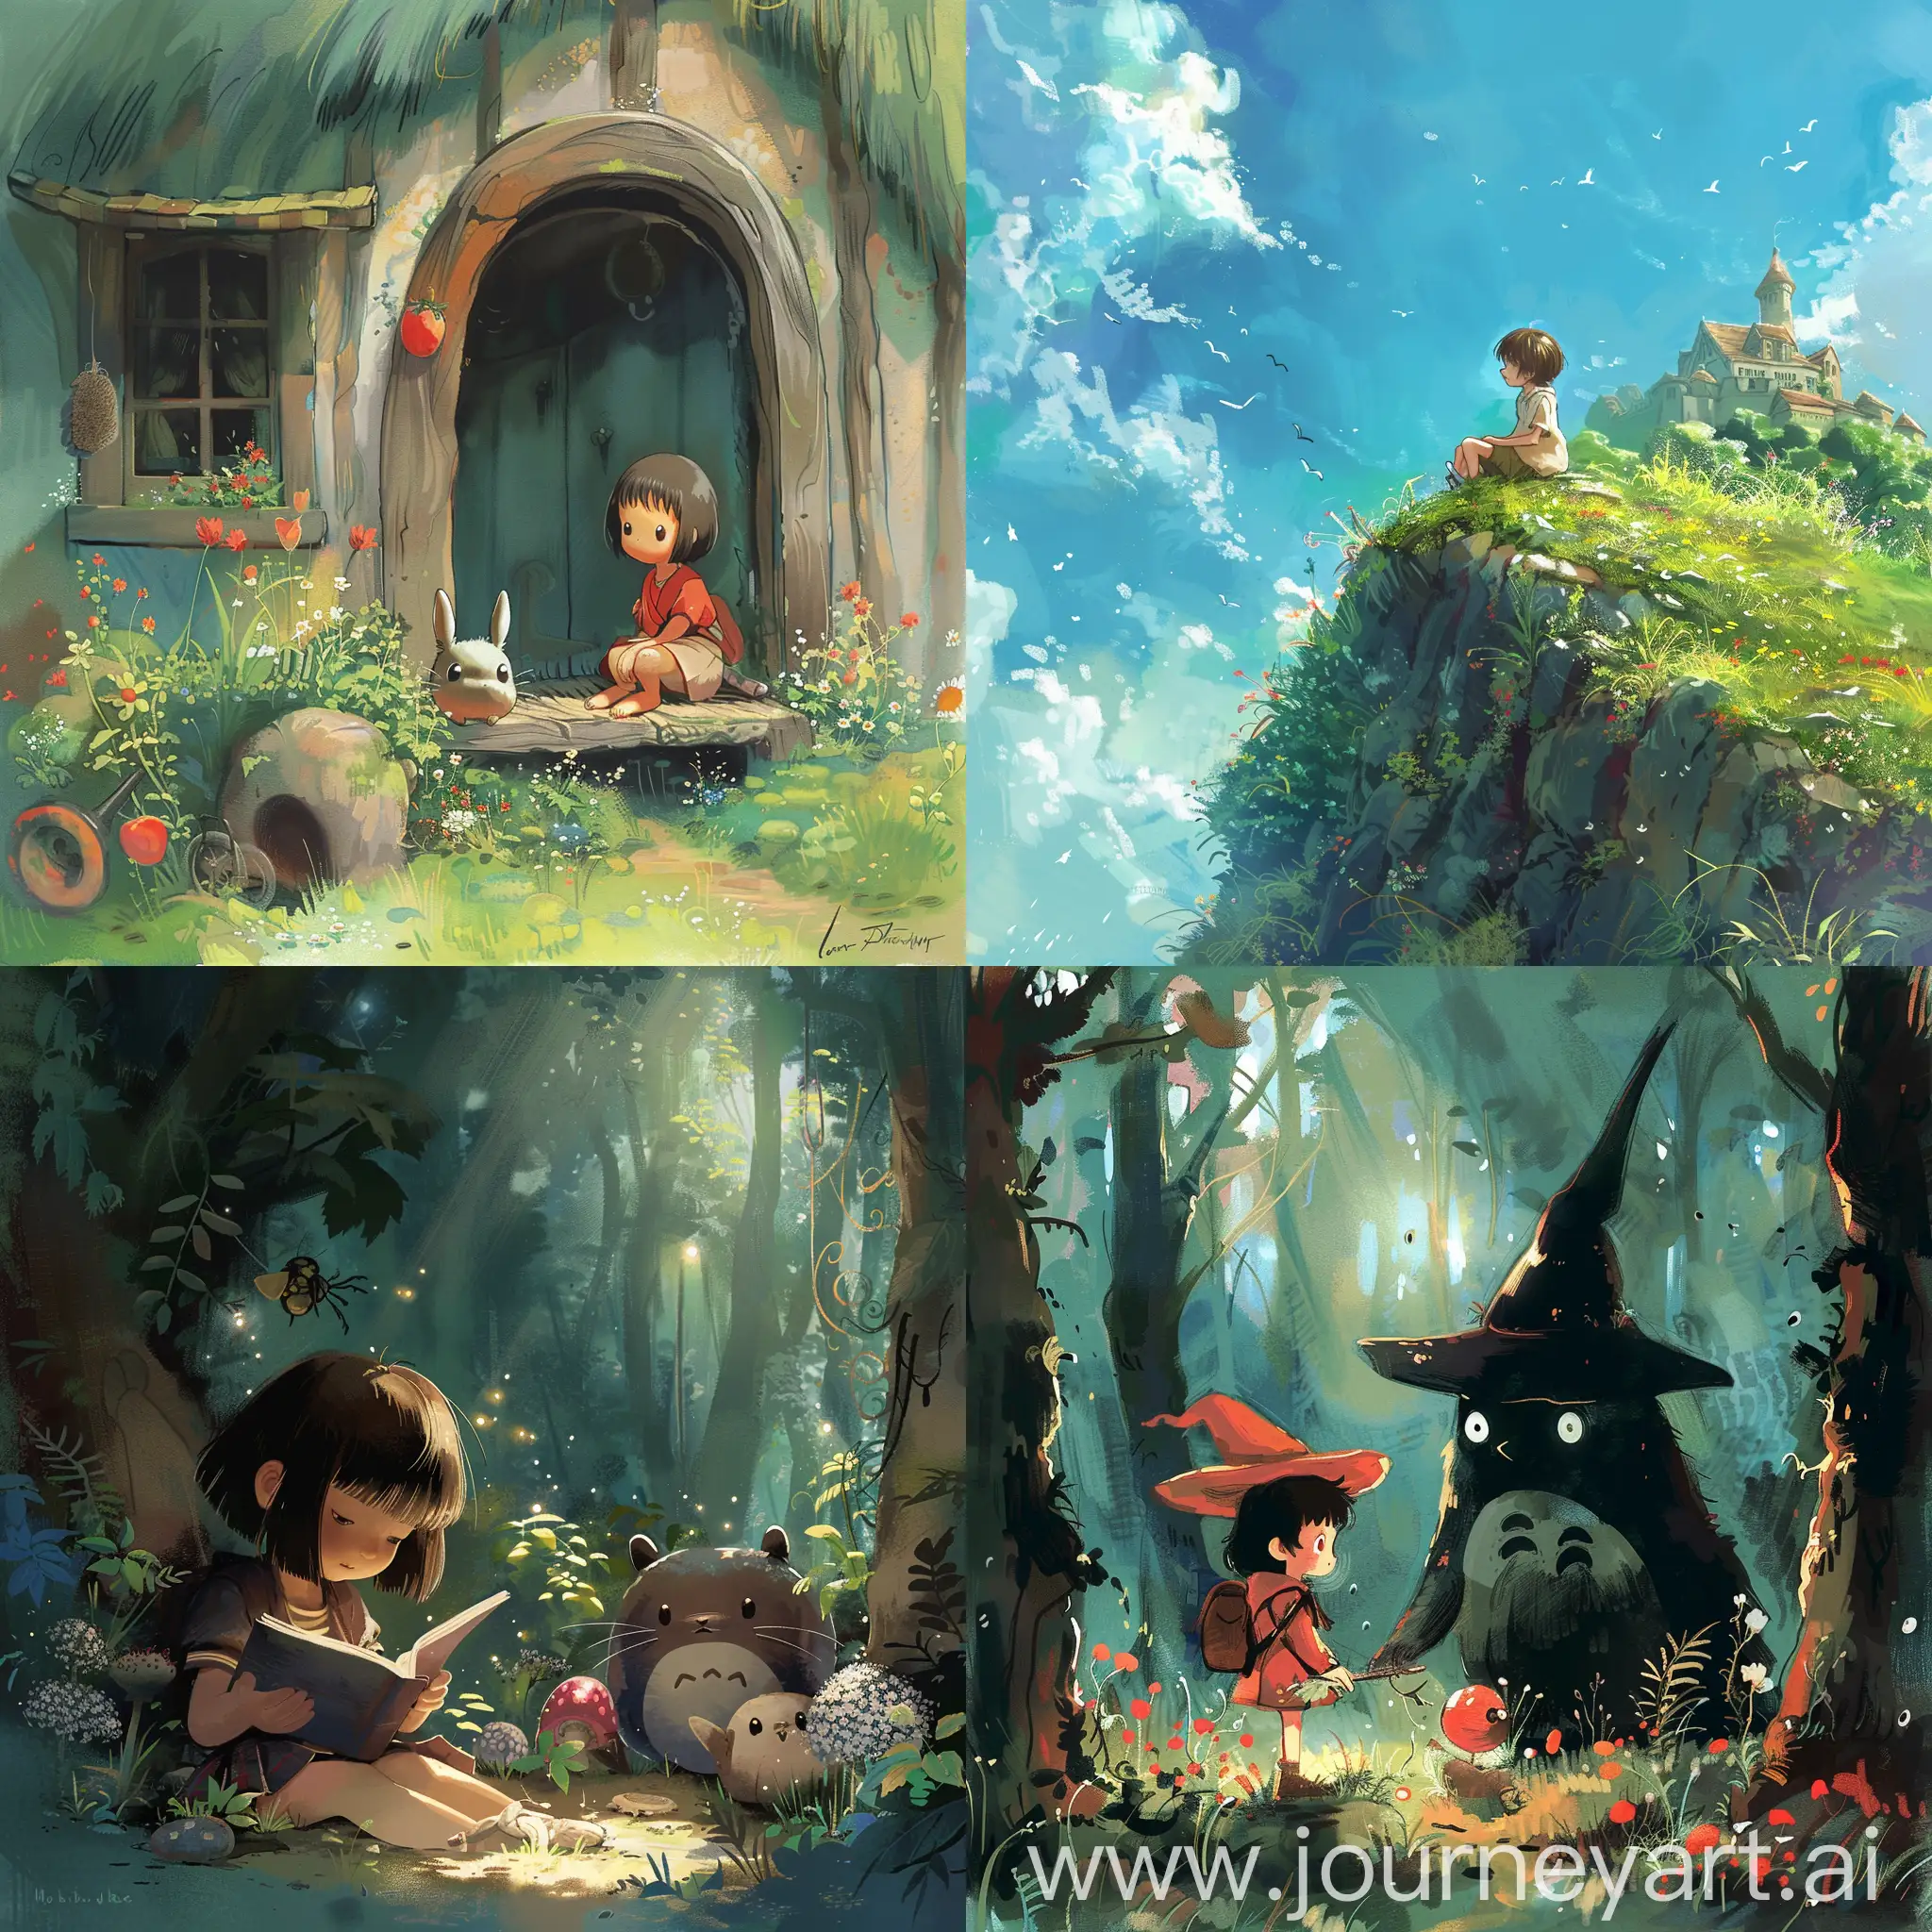 Whimsical-Ghiblistyle-Fantasy-Adventure-for-Children